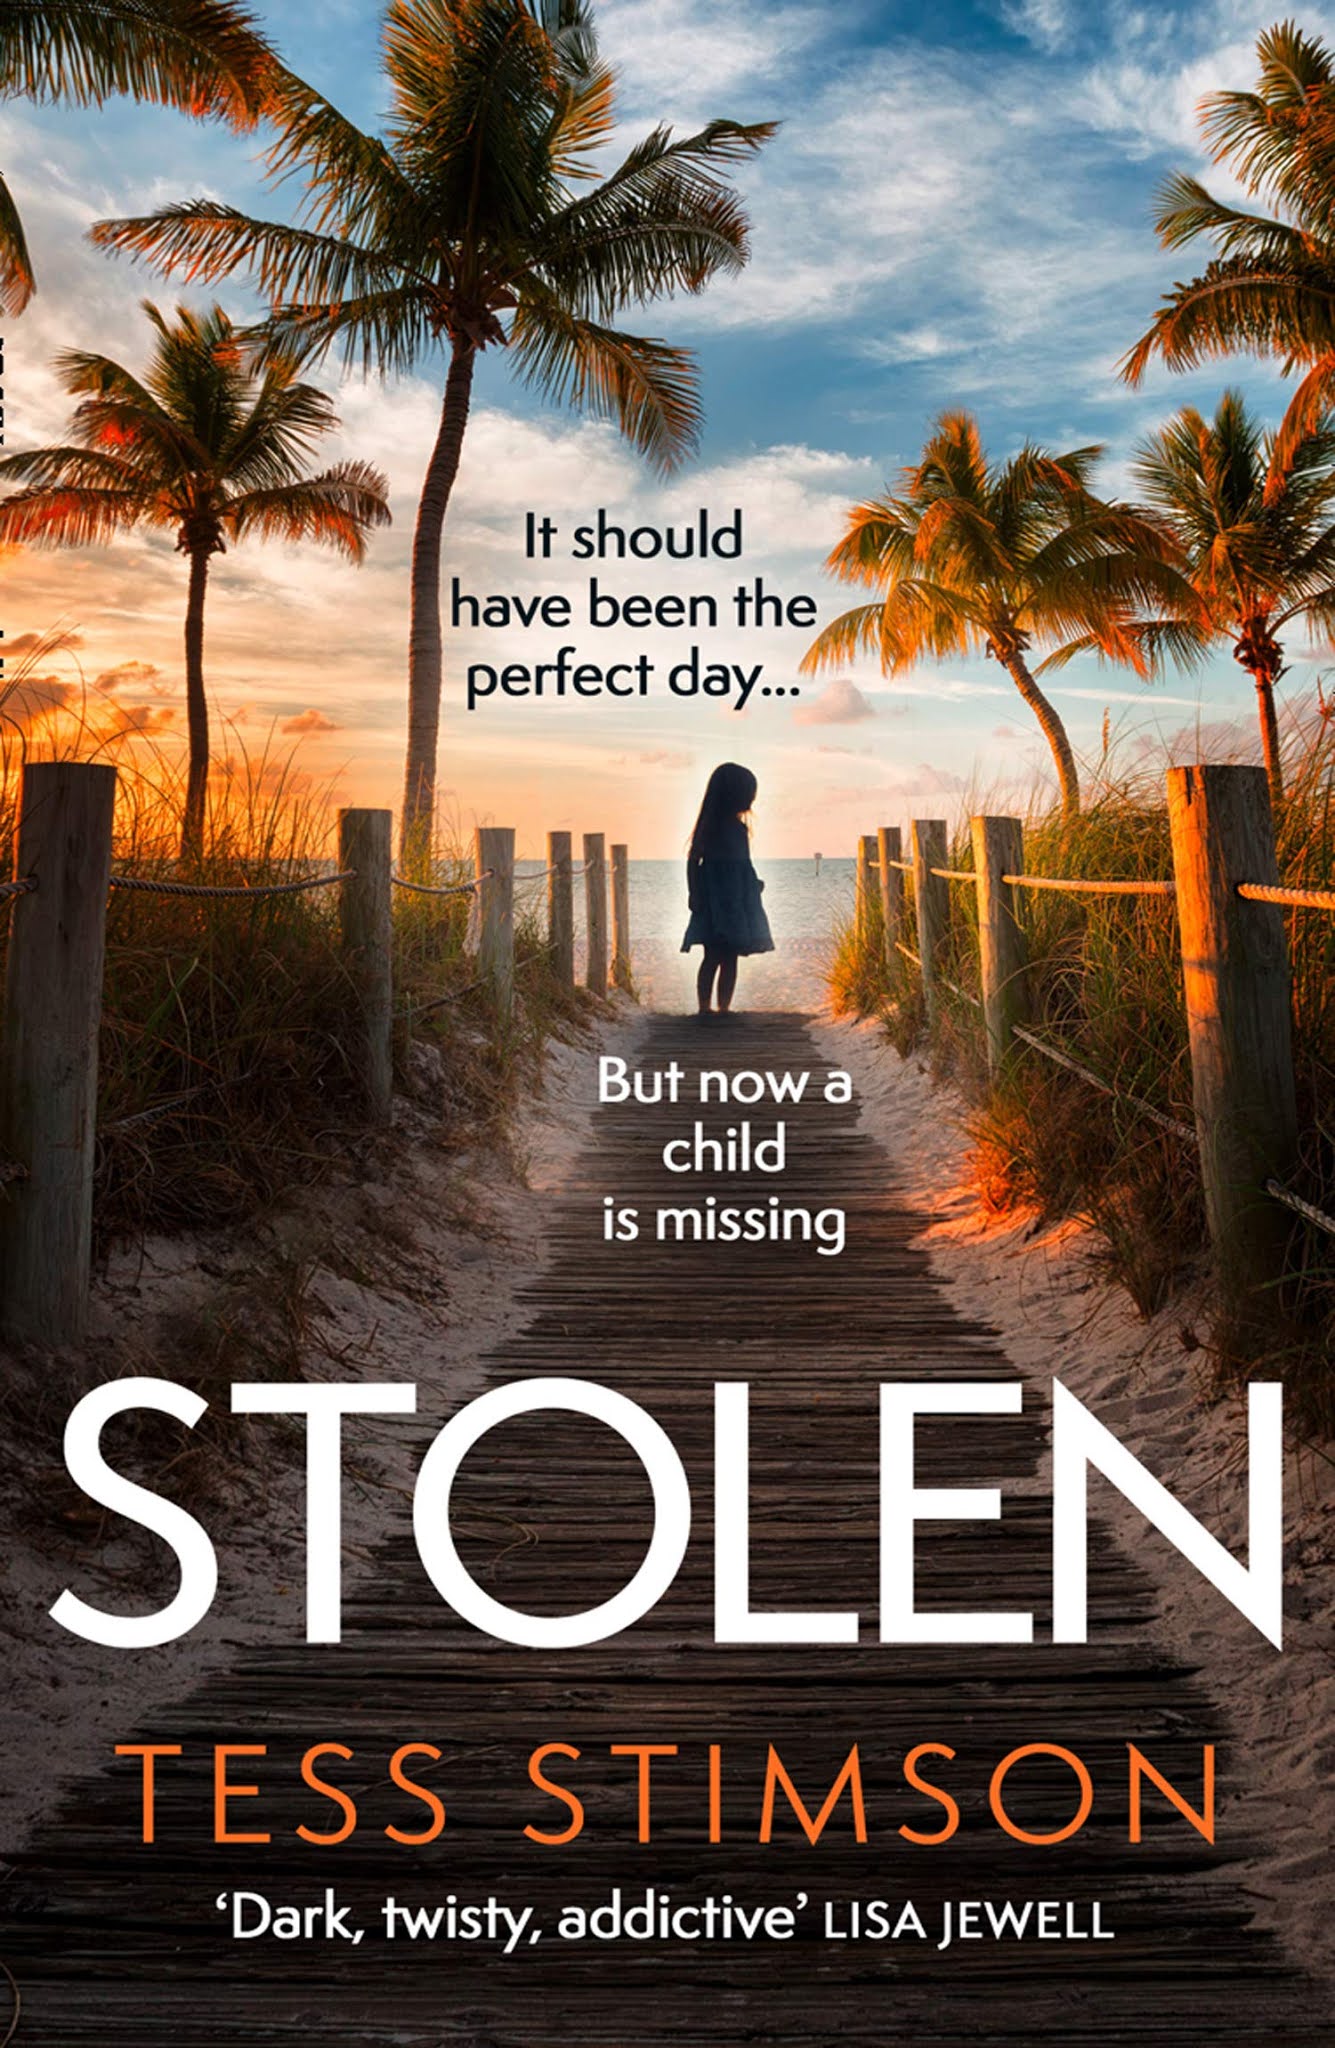 The Writing Greyhound: Book Review: Stolen by Tess Stimson